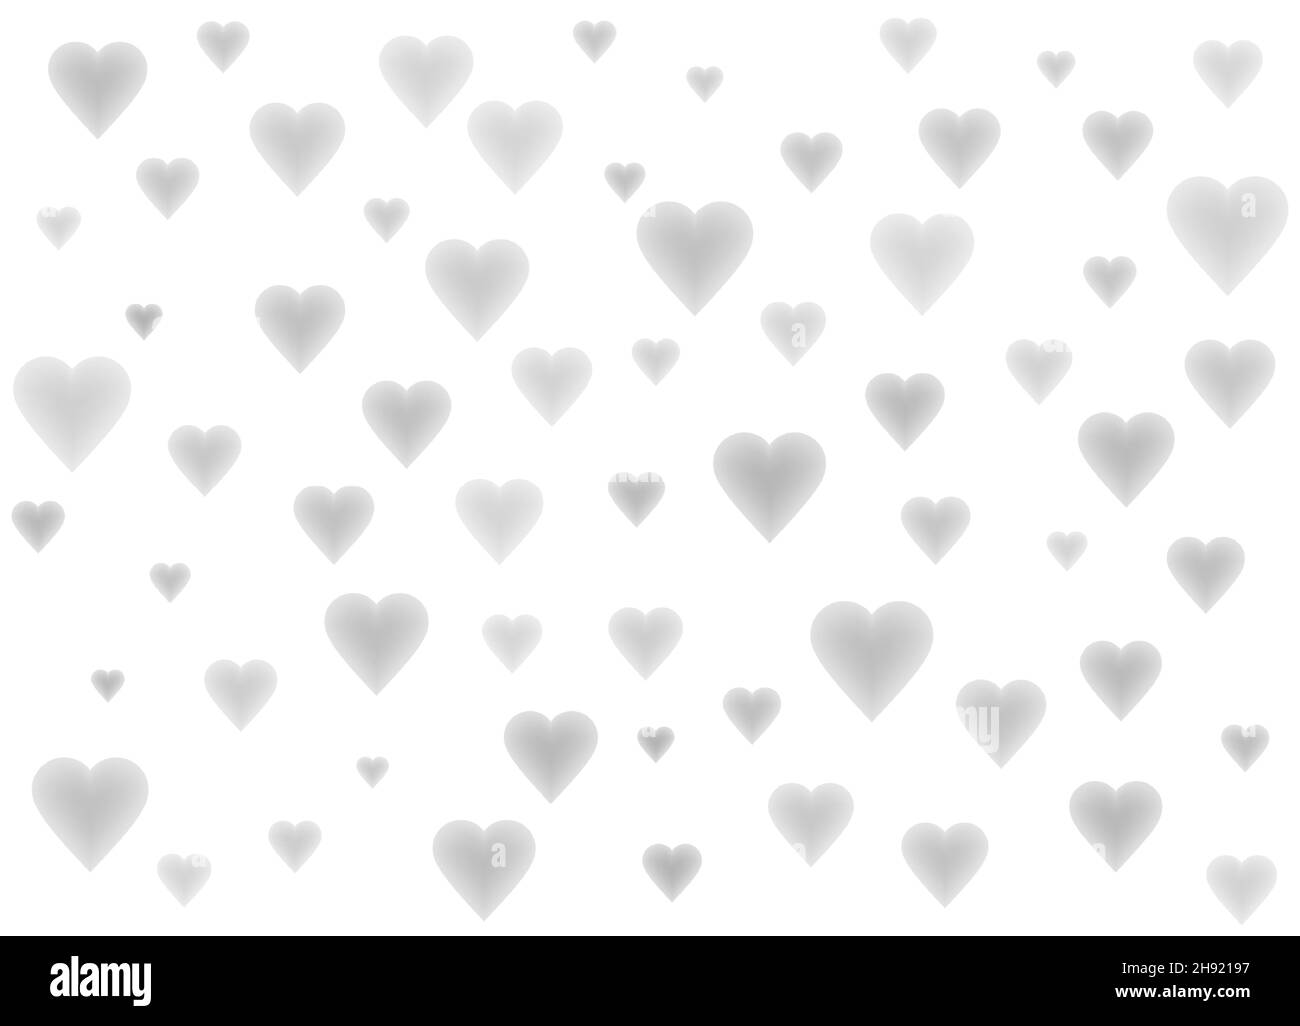 Valentine's Day. Vector illustration with hearts on a white background. Design template. Symbol of love. Stock Vector